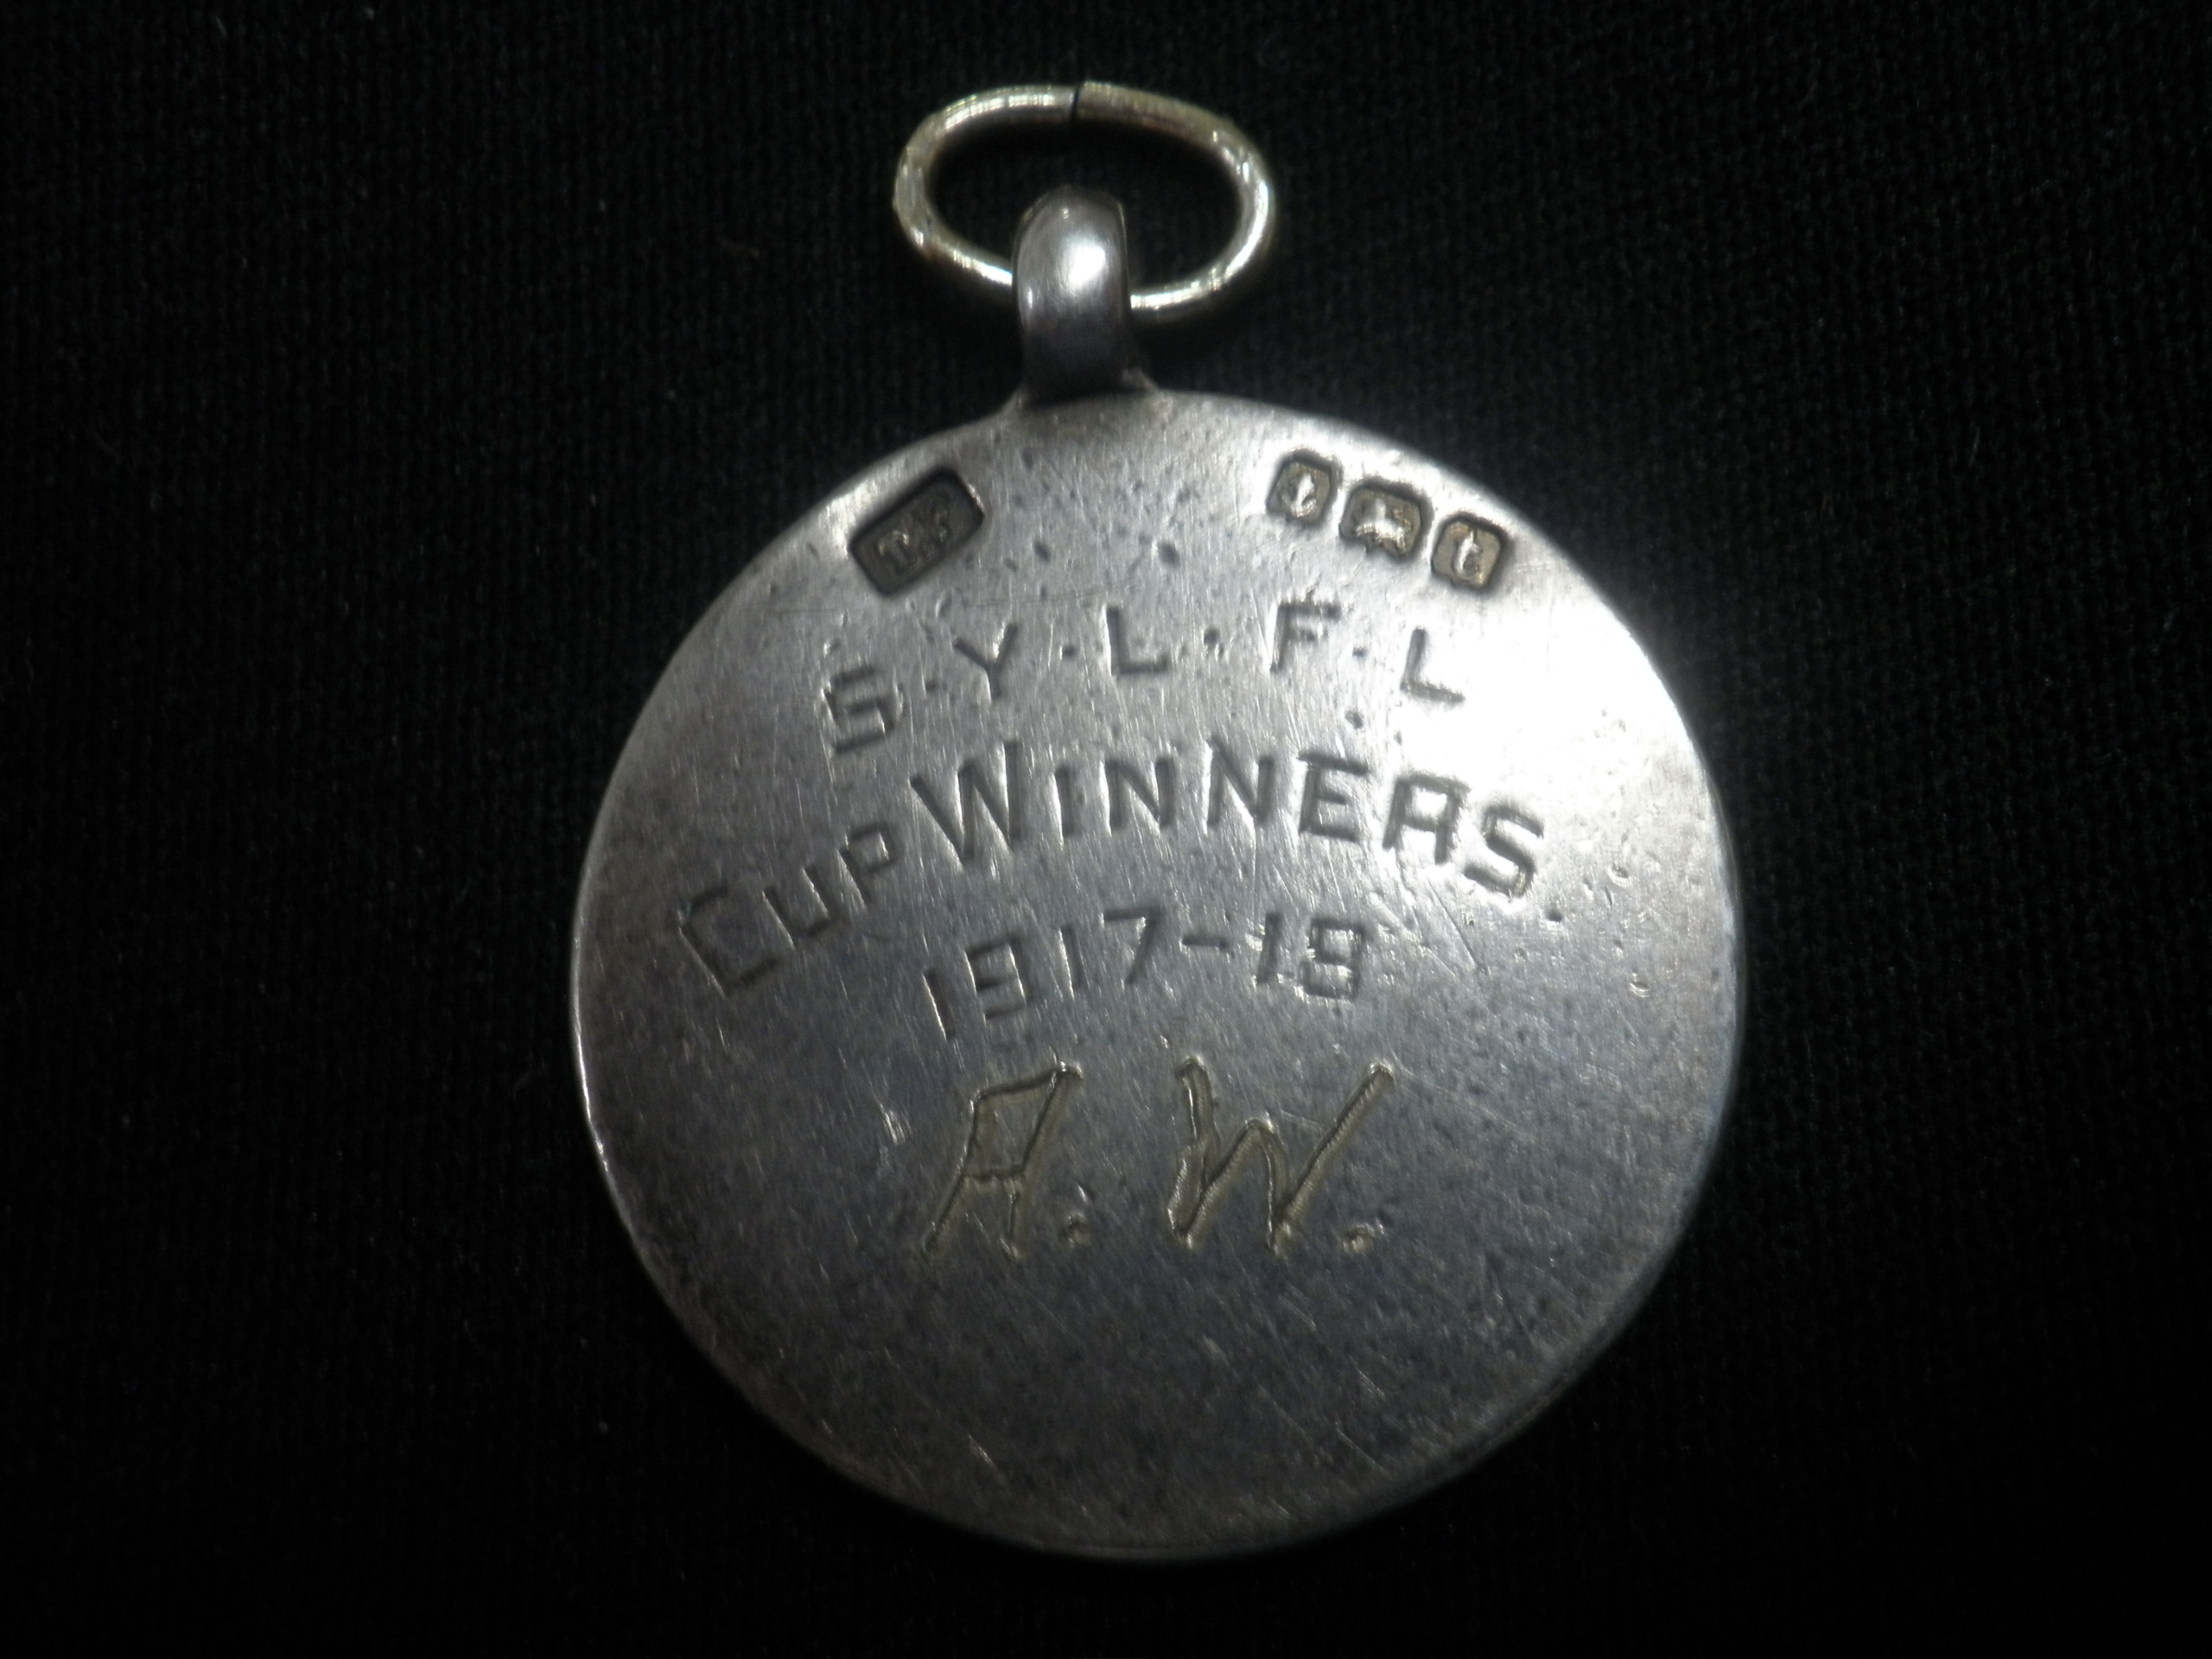 SYLFL Winners medal 1918 - South Yorkshire Ladies Football League winners medal 1918 won by Alice Wardle